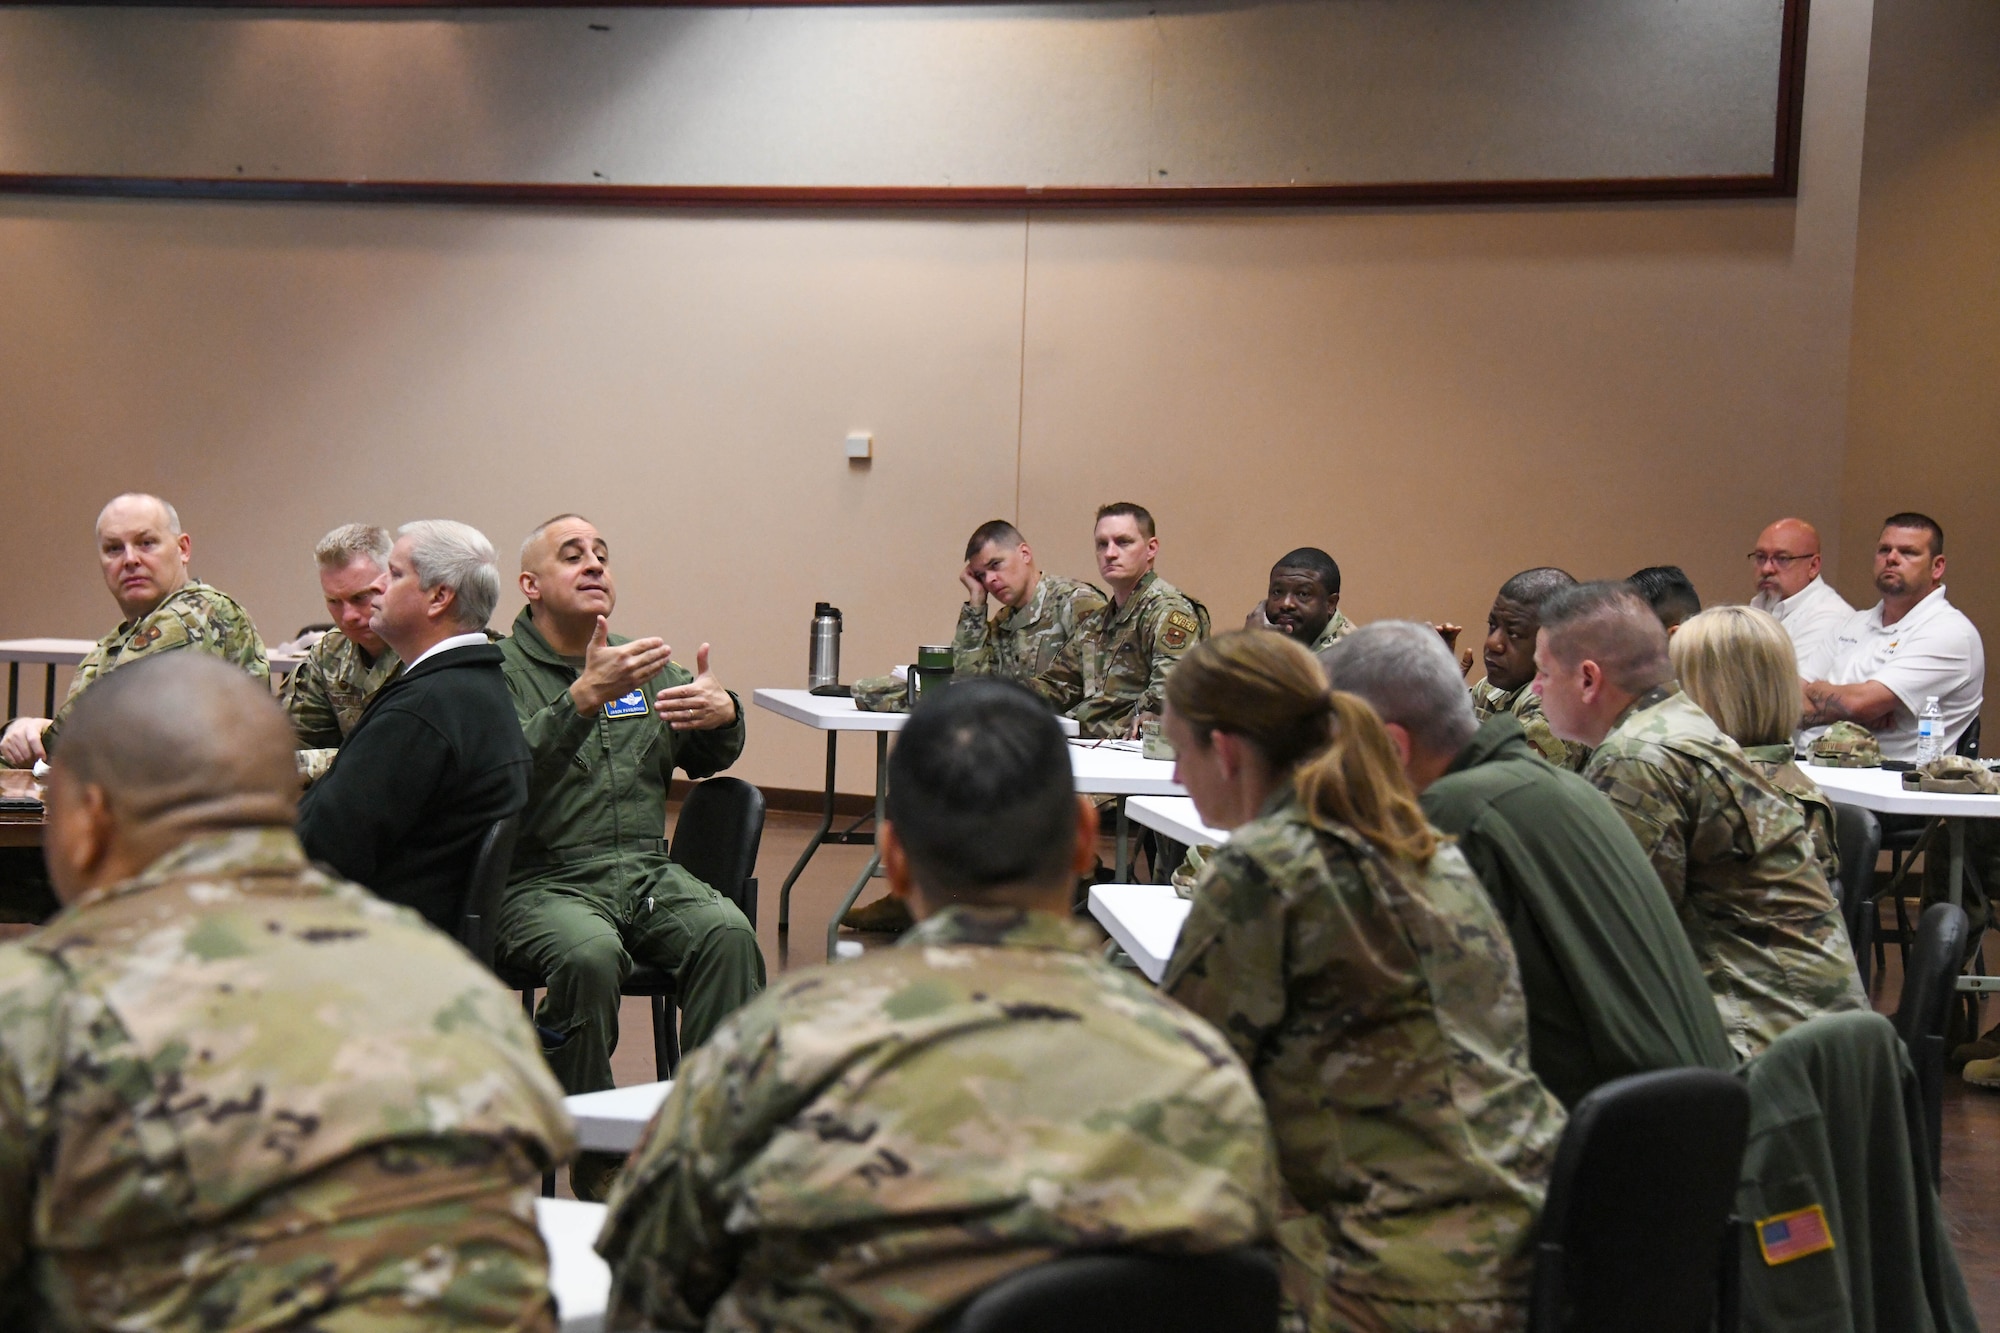 U.S. Air Force Col. Jason Pavelschak, 97th Air Mobility Wing (AMW) vice commander, addresses 97th AMW leaders during their training at Altus Air Force Base, Oklahoma, April 7, 2022. The leaders walked through a sexual assault scenario to solidify their roles and responsibilities during the process, as well as answer related questions. (U.S. Air Force photo by Airman 1st Class Trenton Jancze)